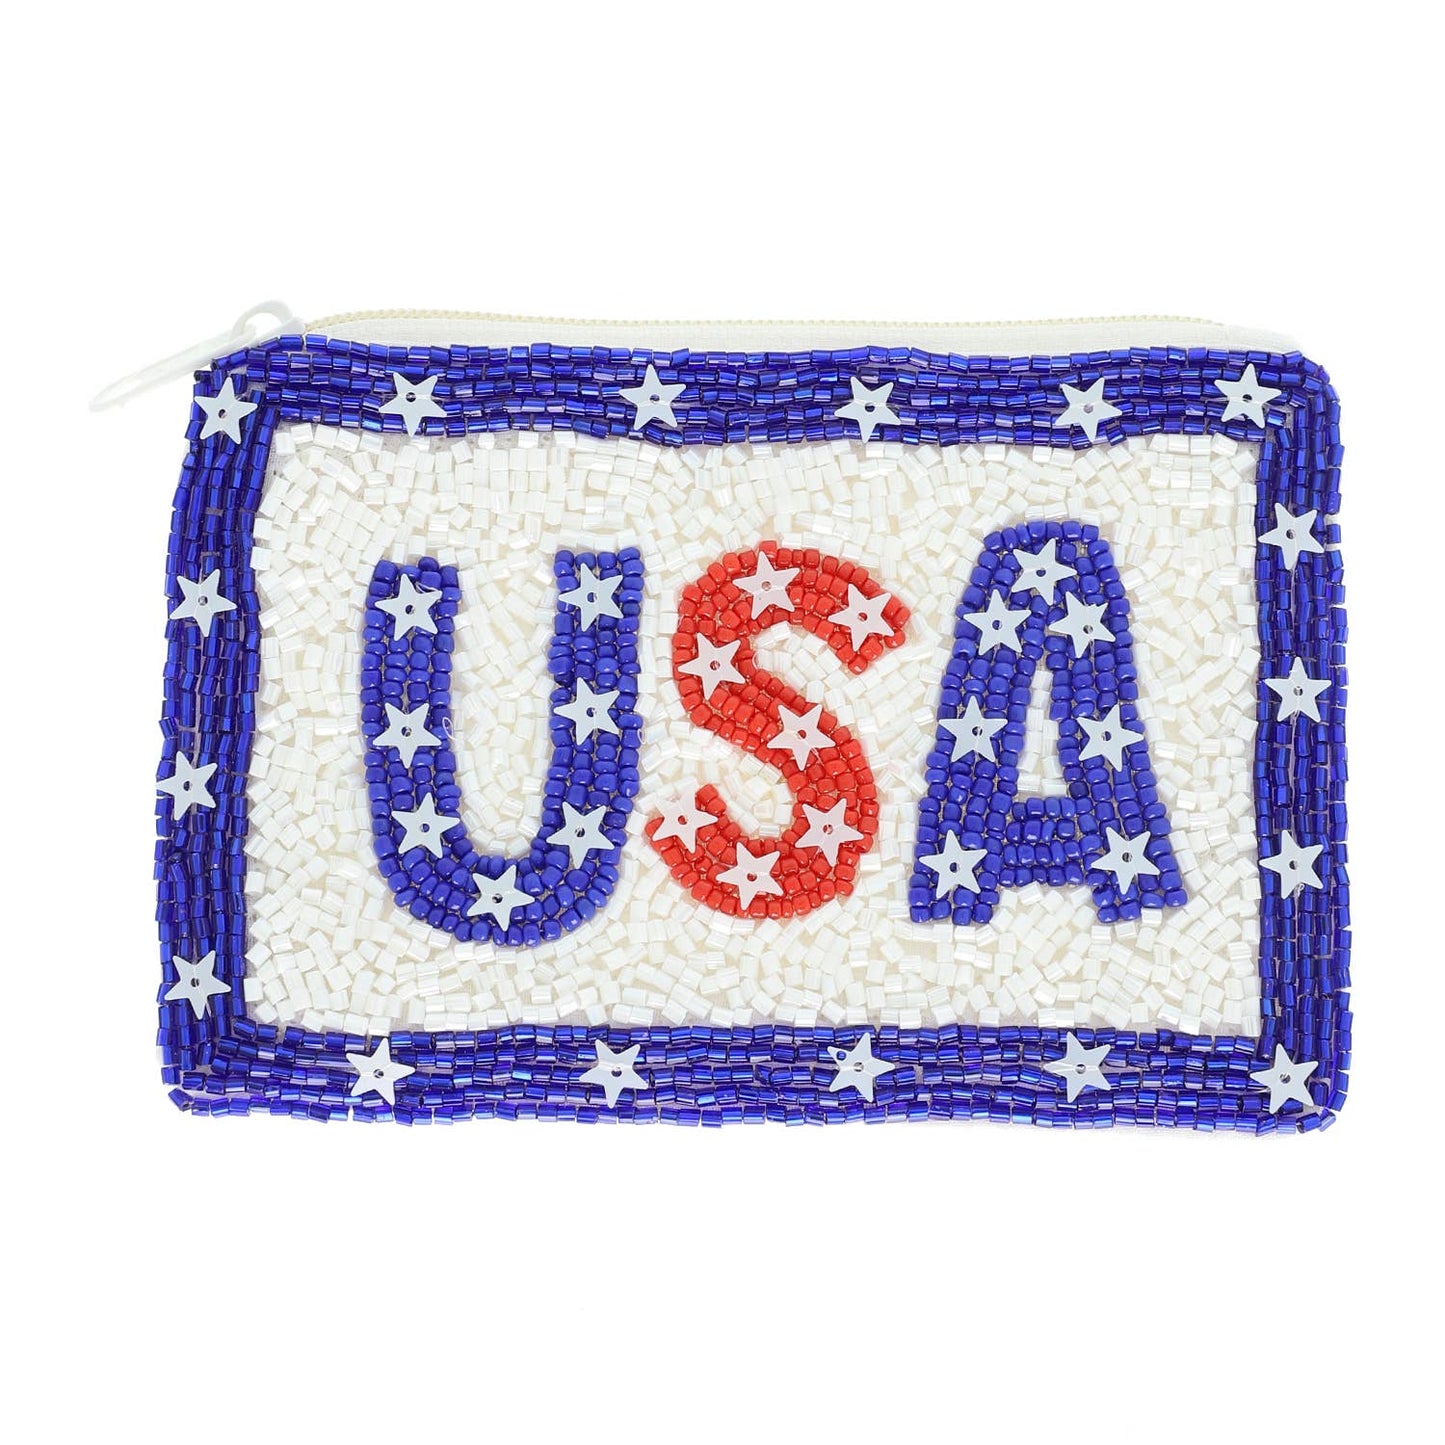 SP Sophia Collection - Patriotic America USA Letter Beaded Coin Bag